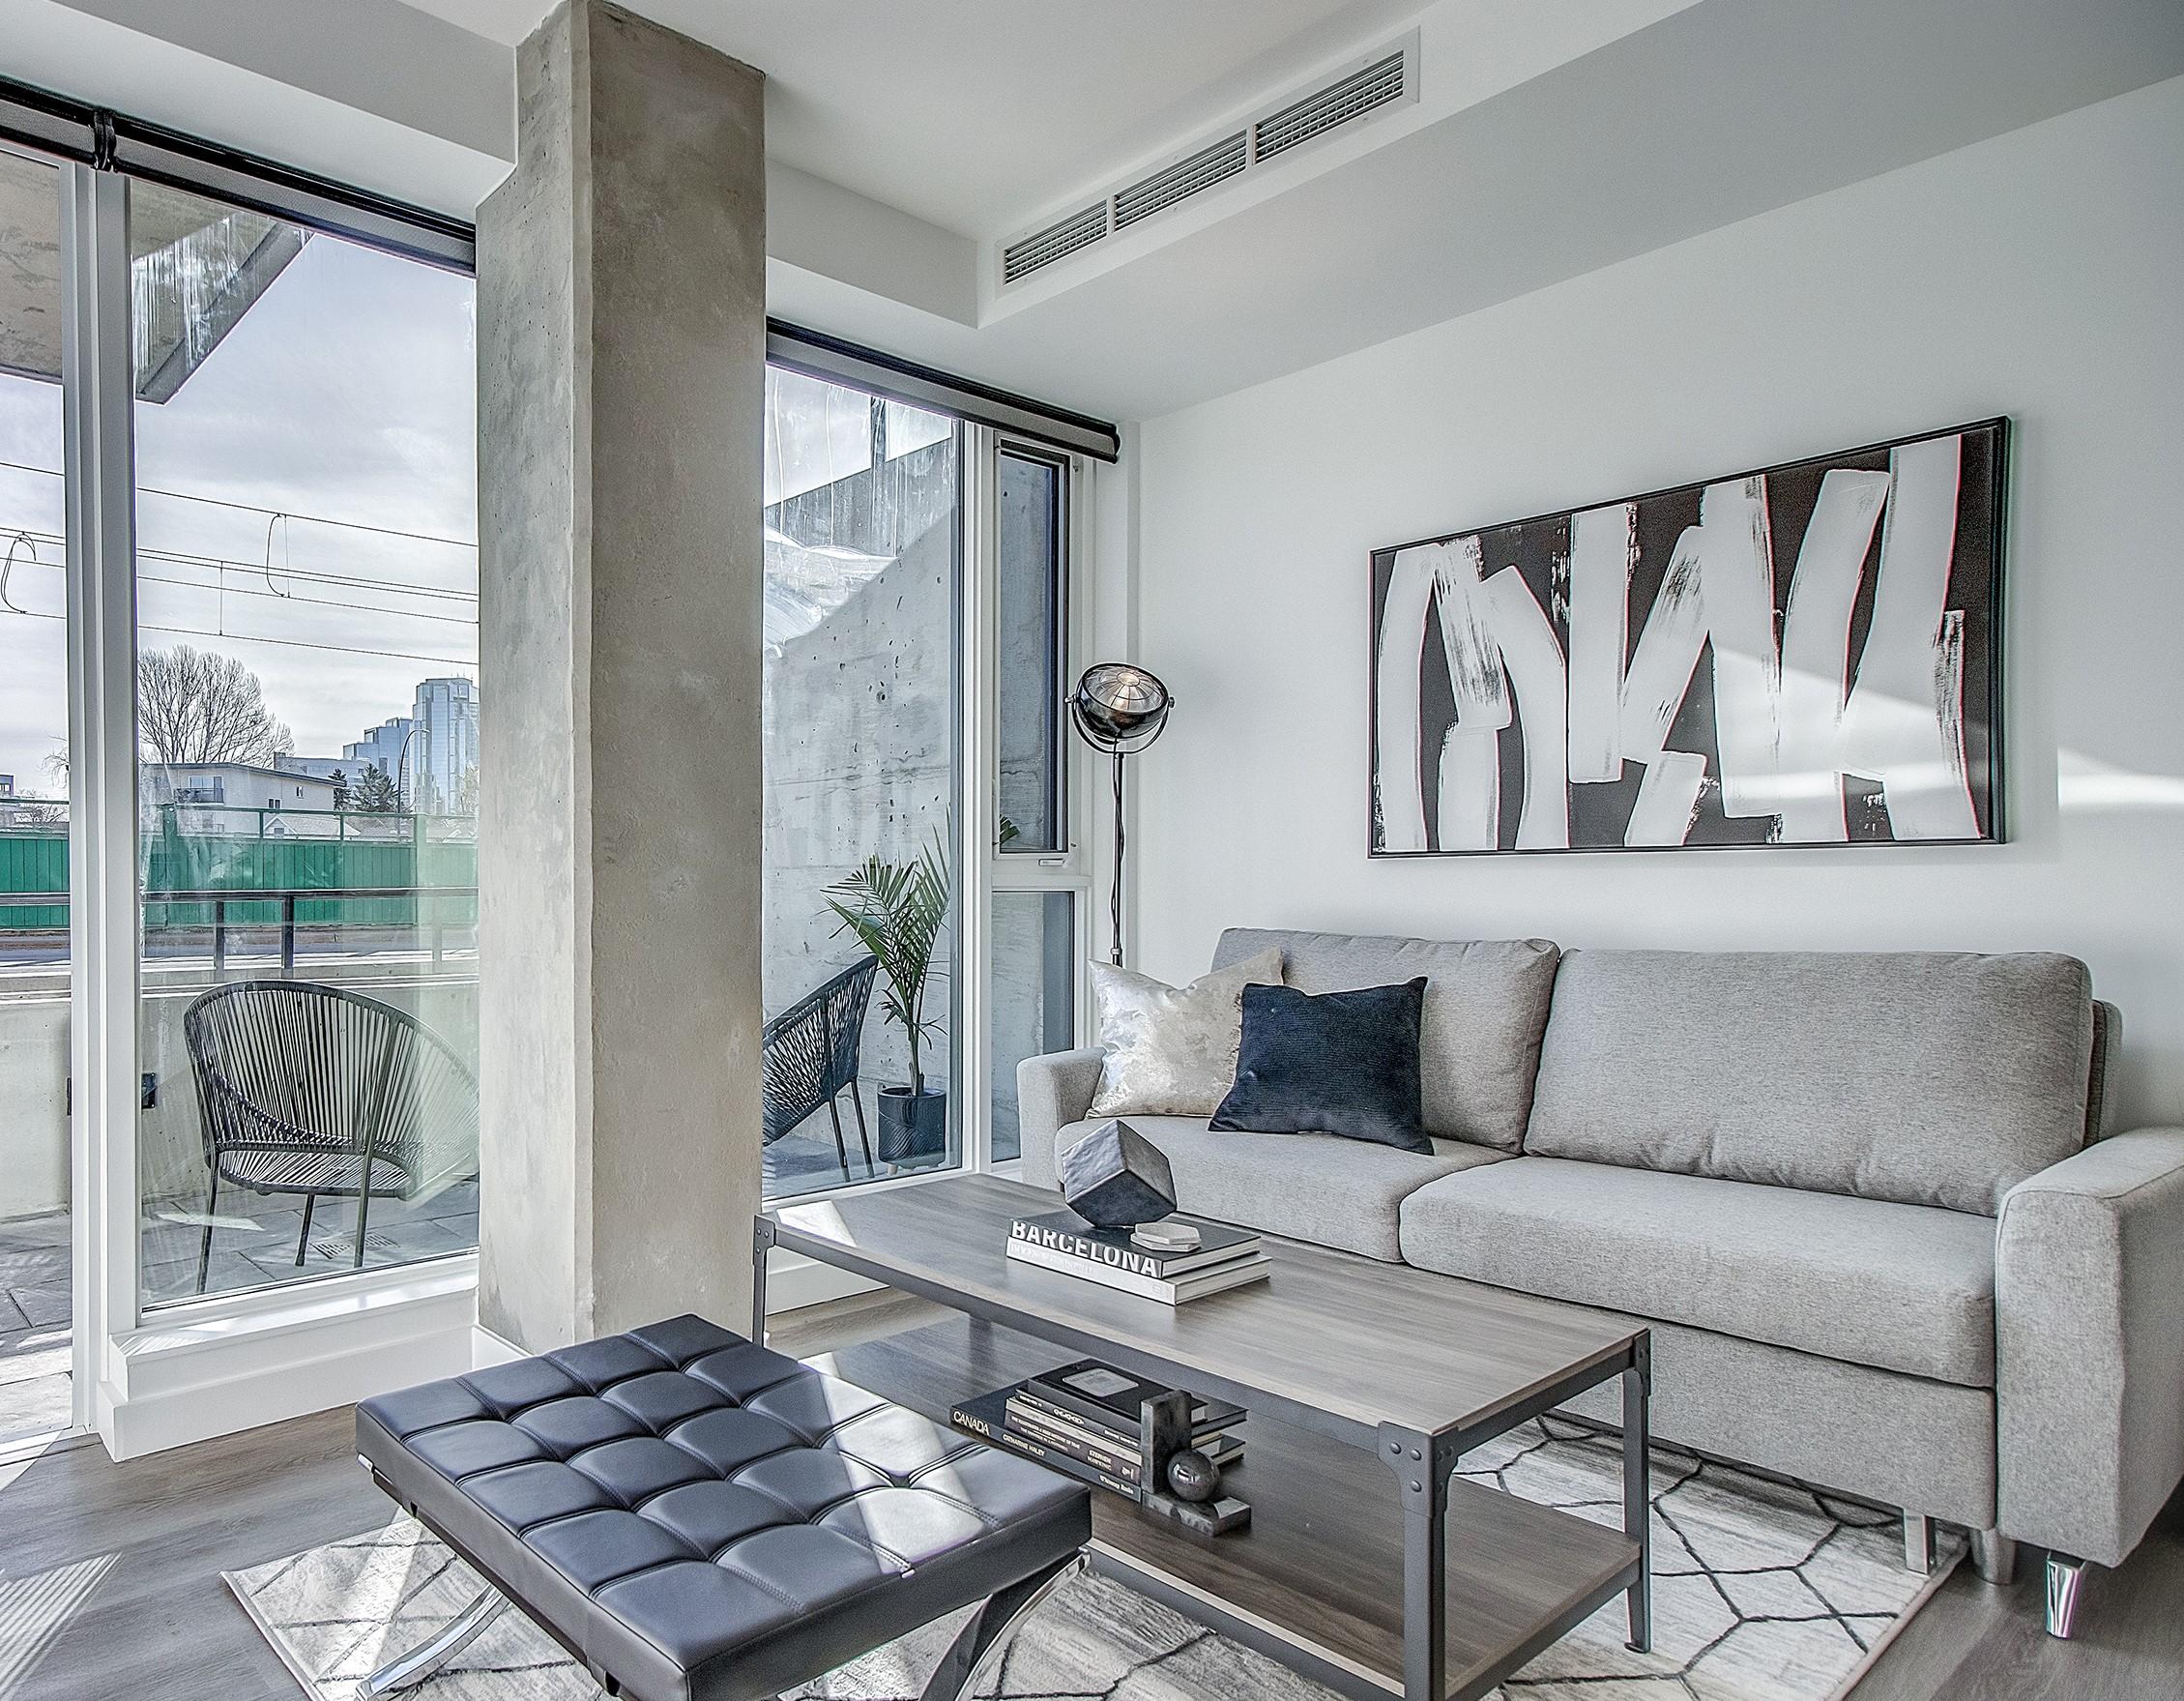 Property Image 1 - Upscale Industrial Loft-style with Walkout